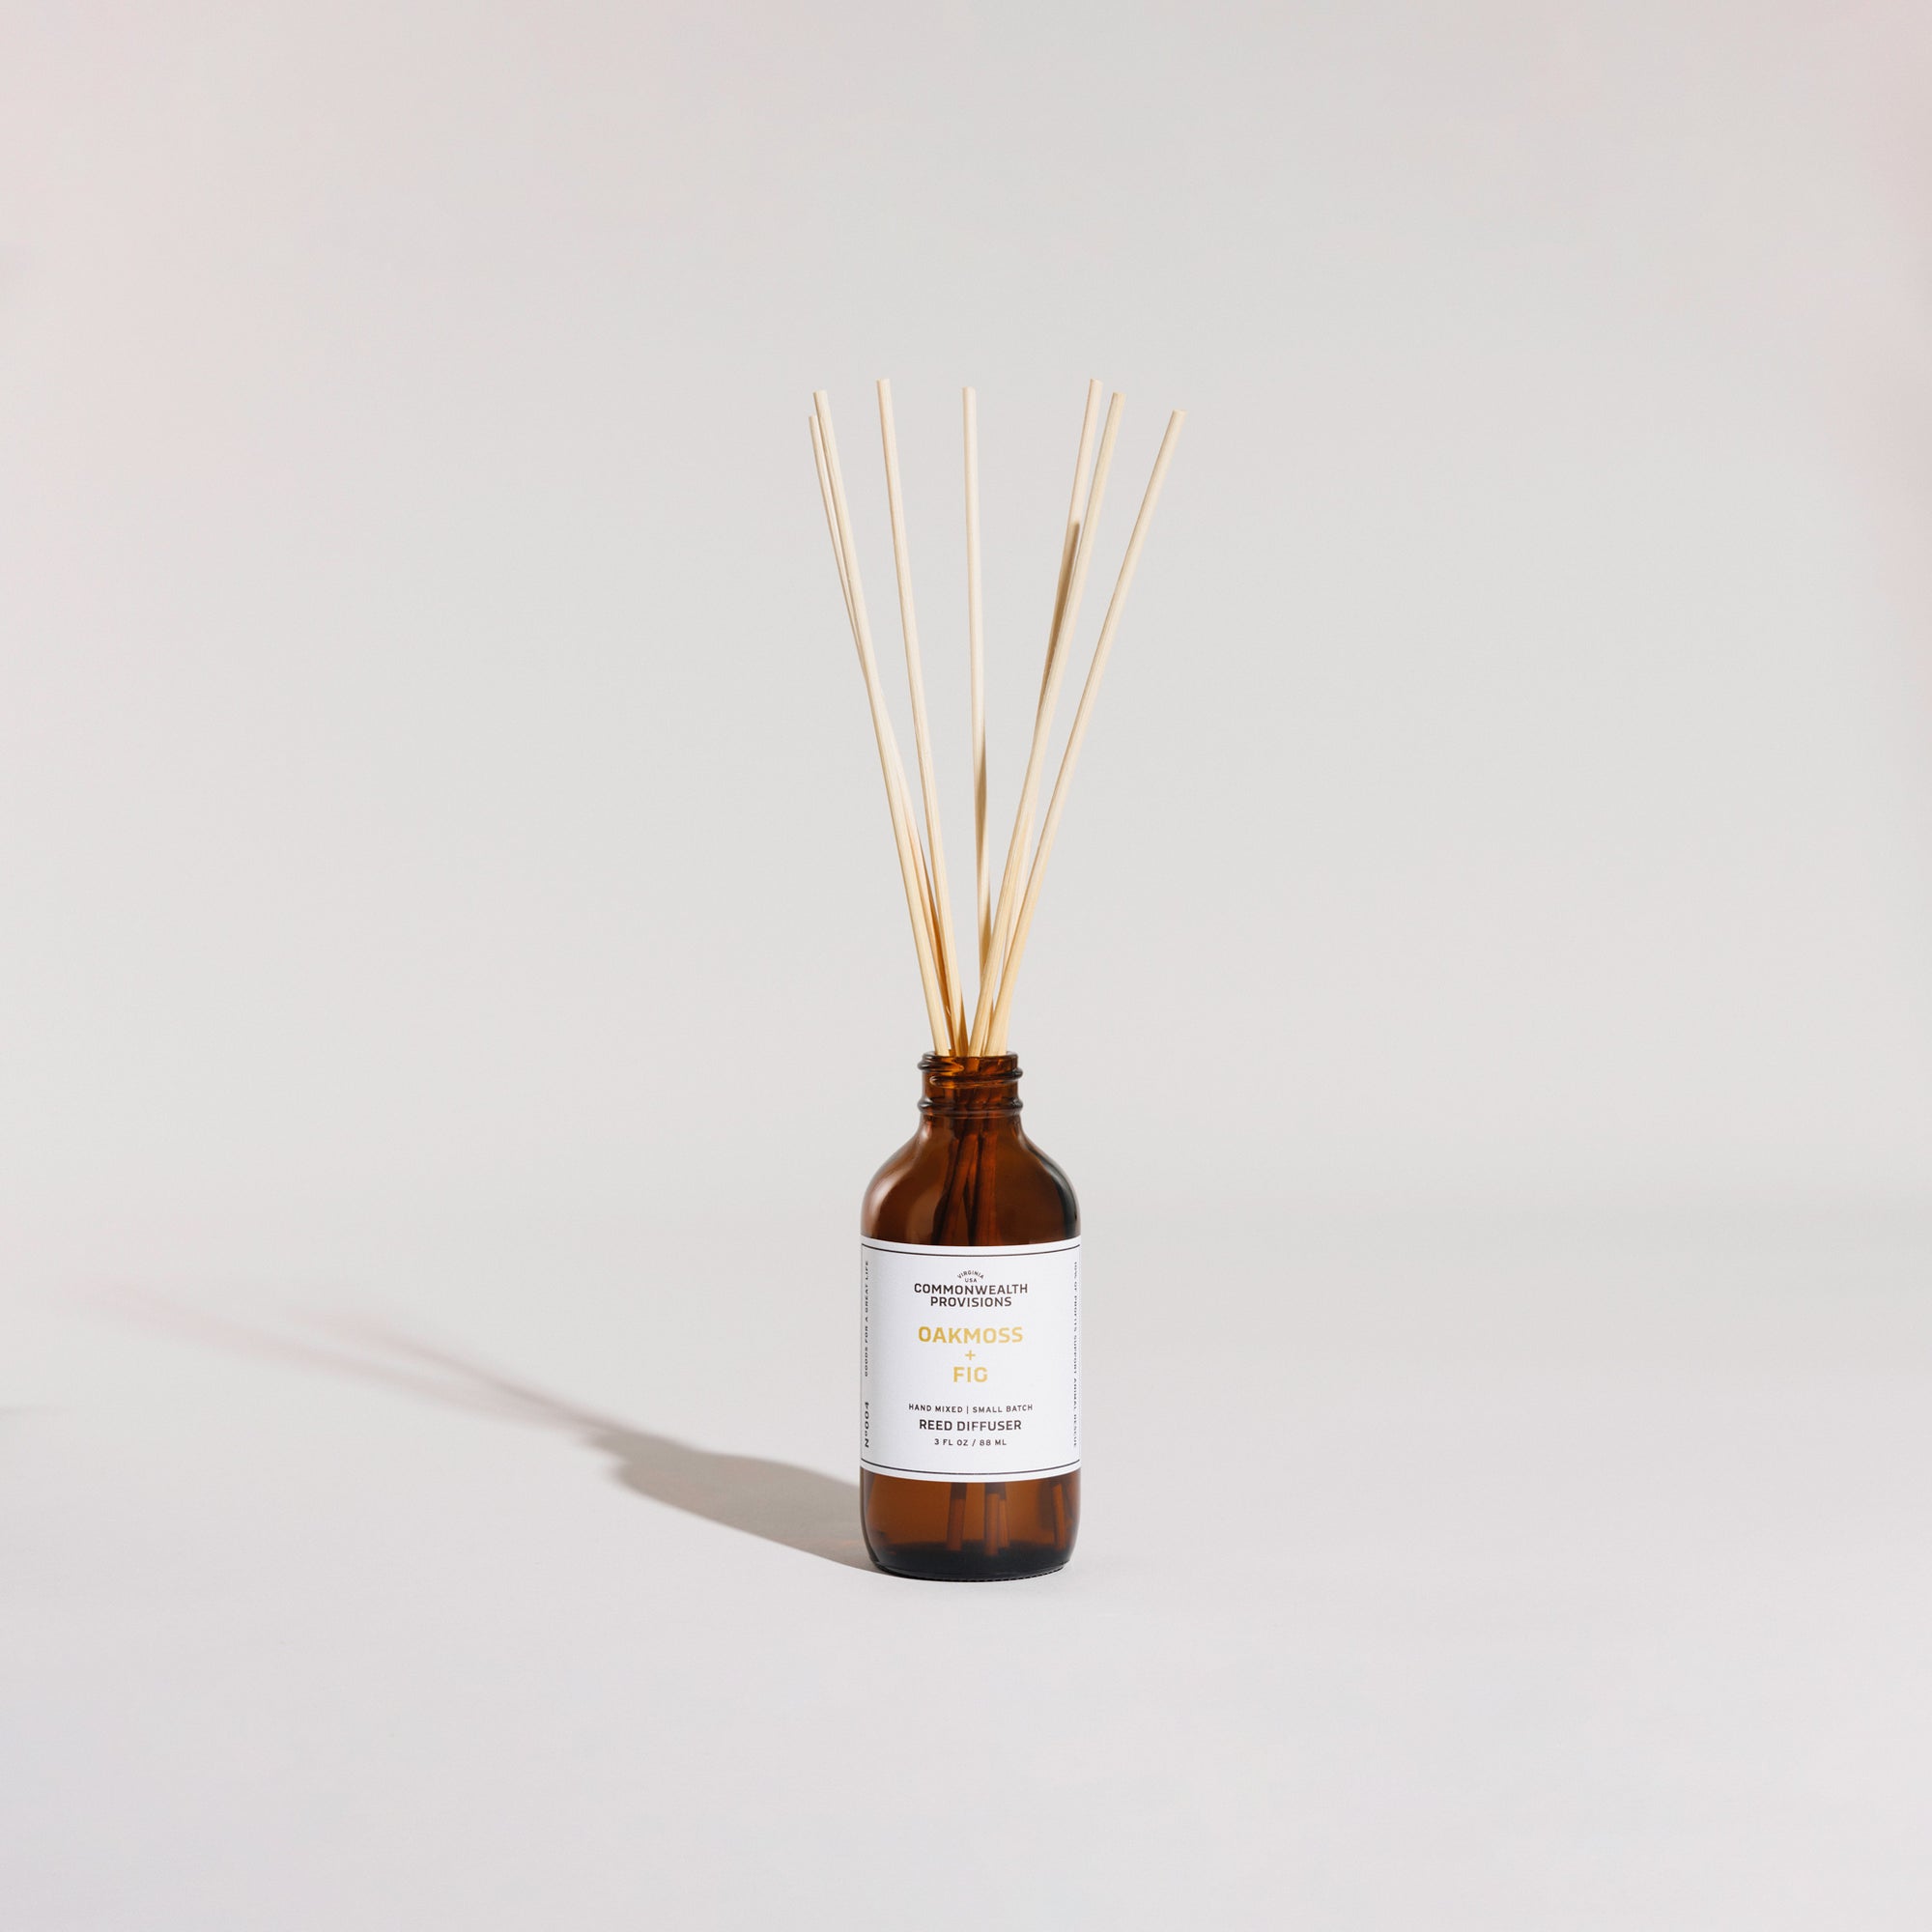 Oakmoss + Fig Reed Diffuser | Commonwealth Provisions